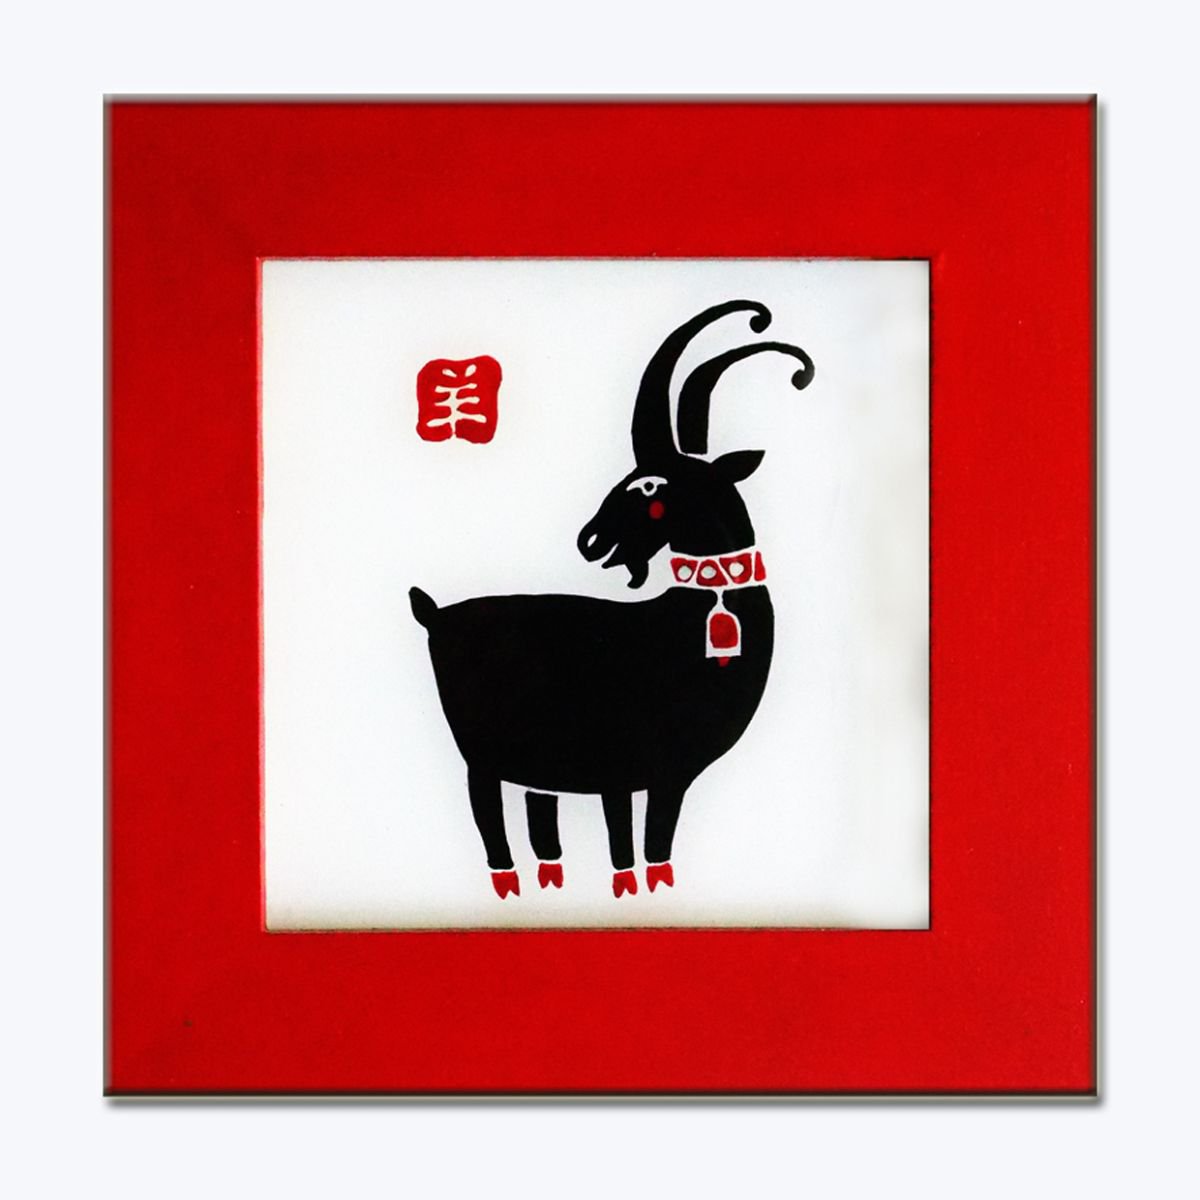 Year of the Goat (Sheep) by Adriana Vasile